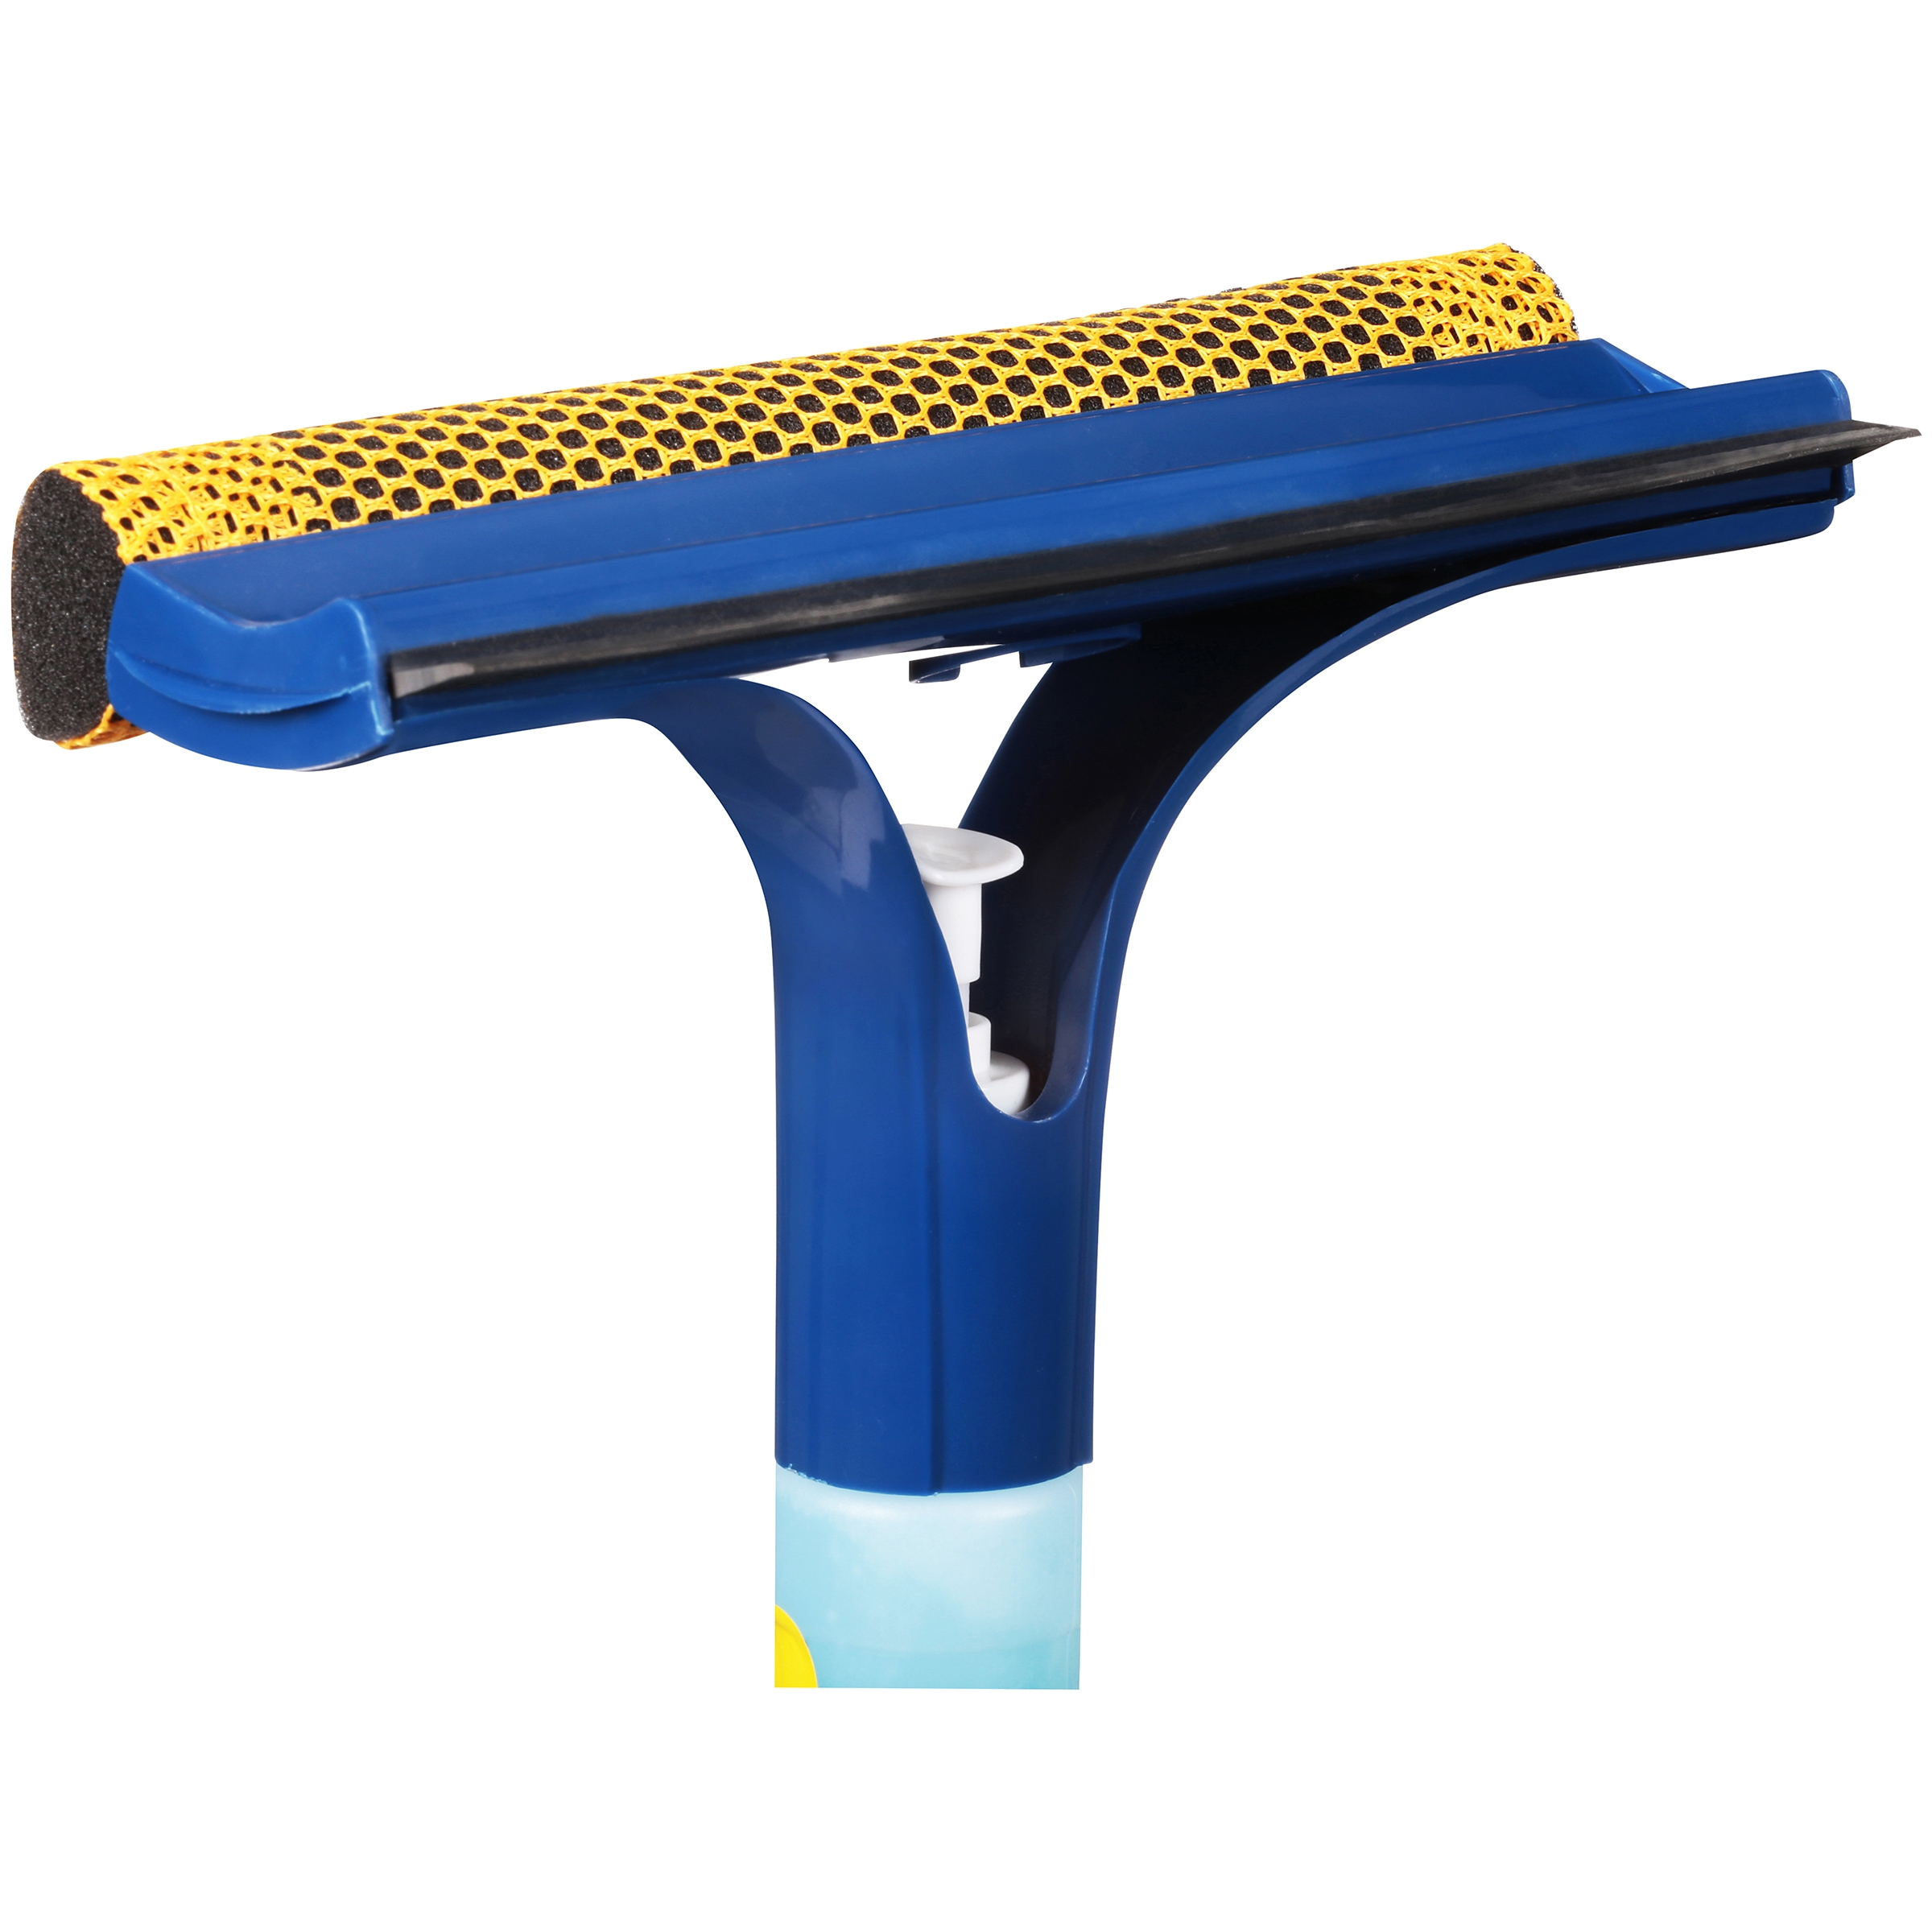 Rain-X Liquid-Filled Spray Squeegee for Glass & Window Cleaning, Blue, 1PK,  9425CDX